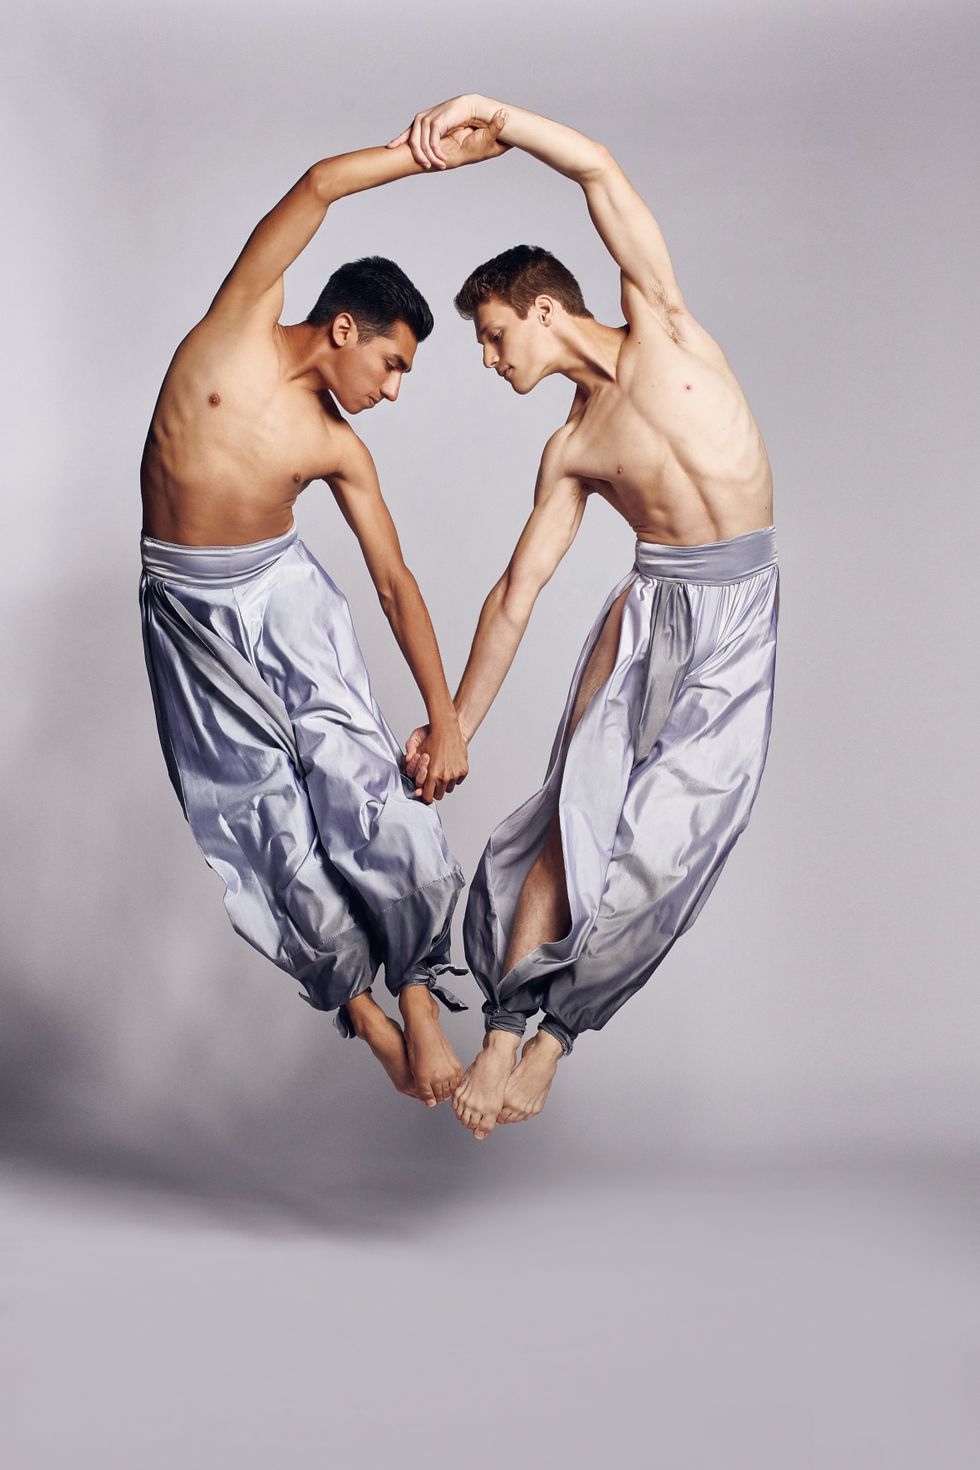 Two male dancers leap into the air, holding handsu2014one above their heads and one above. They wear shiny silver pants, with their heads and feet touching and their hips leaning away.